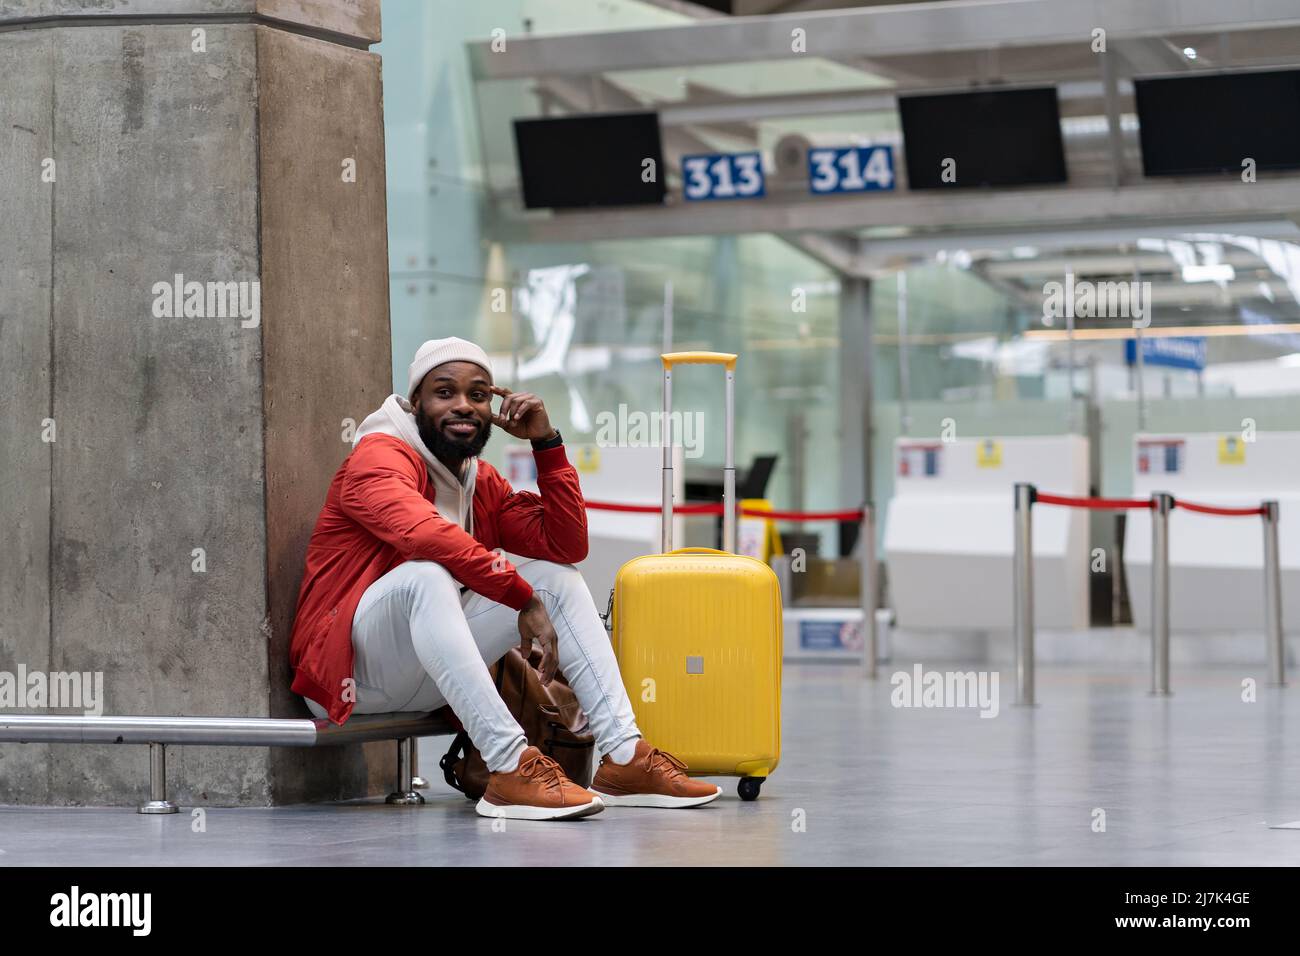 Joyful African American man sitting in airport terminal with yellow suitcase near check-in counters. Stock Photo